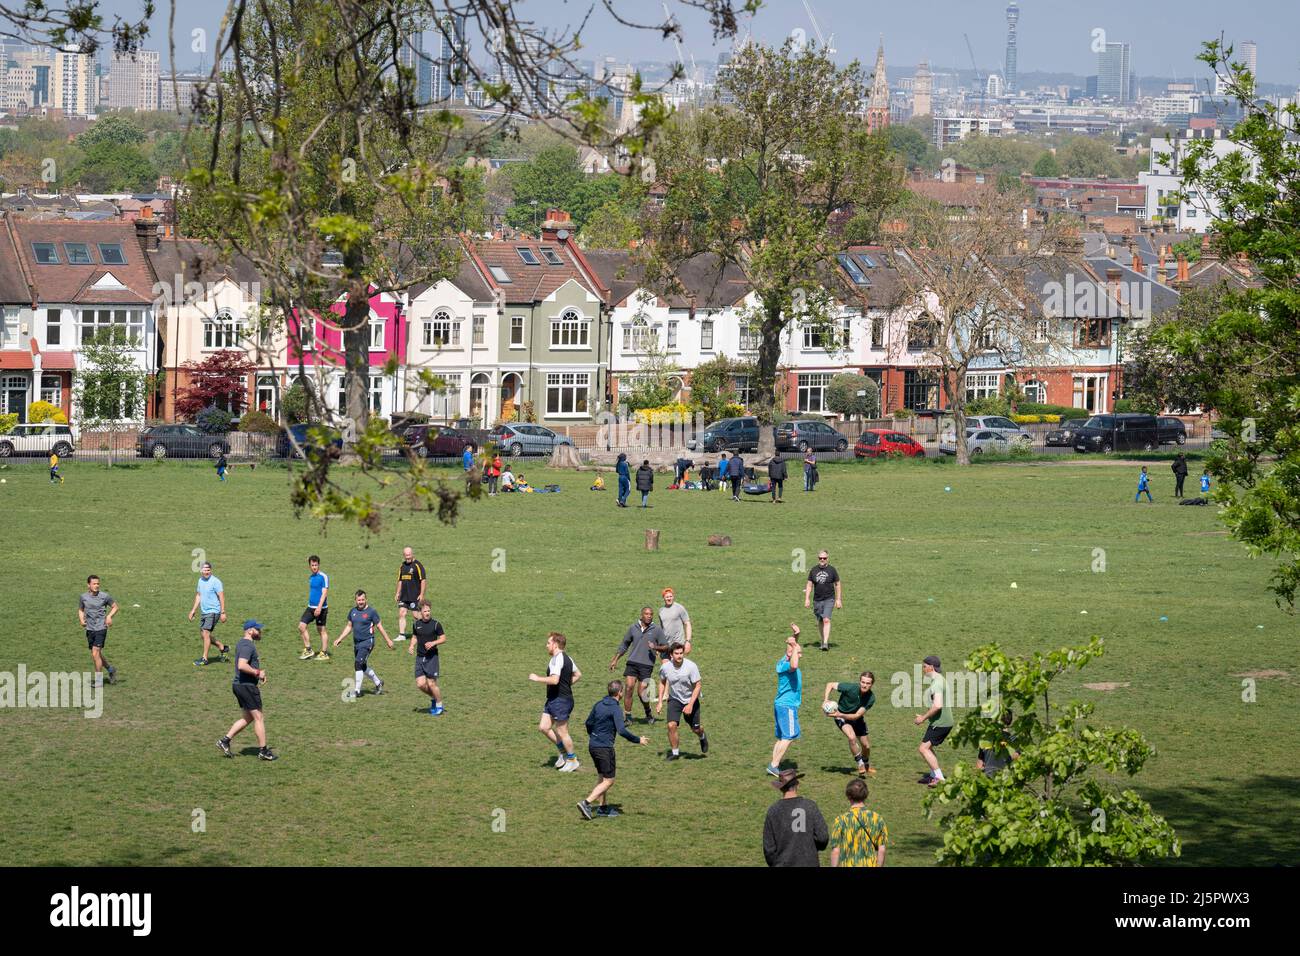 A local game of touch rugby is played in Ruskin Park, a south London green space that overlooks houses in Lambeth, on 24th April 2022, in London, England. Touch rugby is a safer variation of rugby football in which players do not tackle each other but instead touch their opponents using their hands on any part of the body, clothing, or the ball. Stock Photo